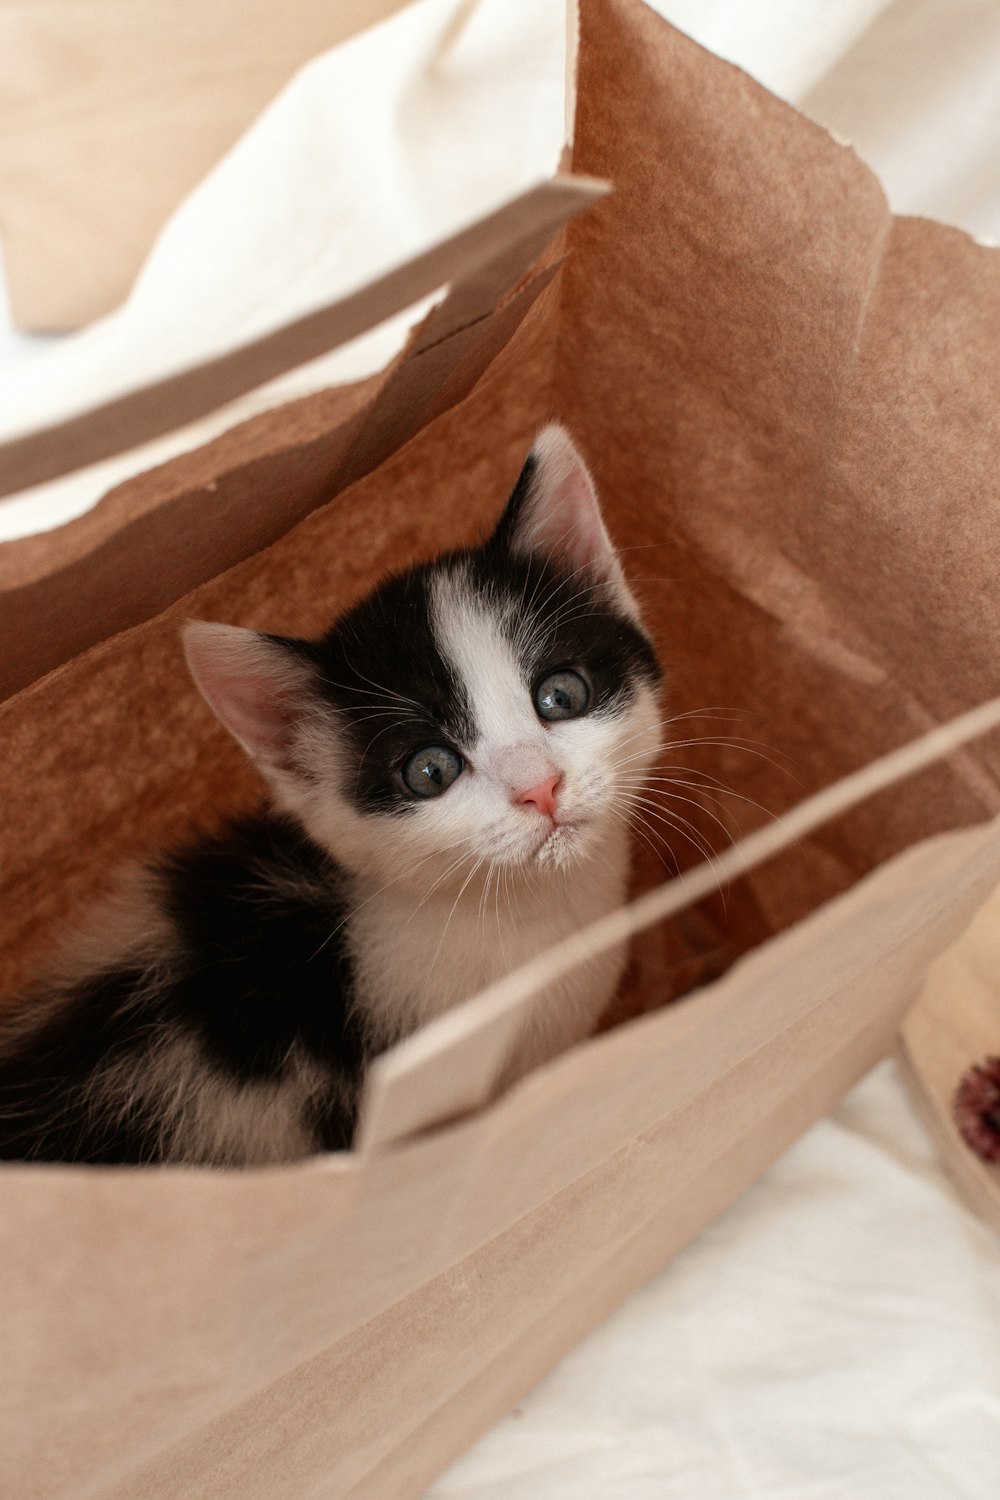 a black and white kitten sitting inside of a brown paper bag